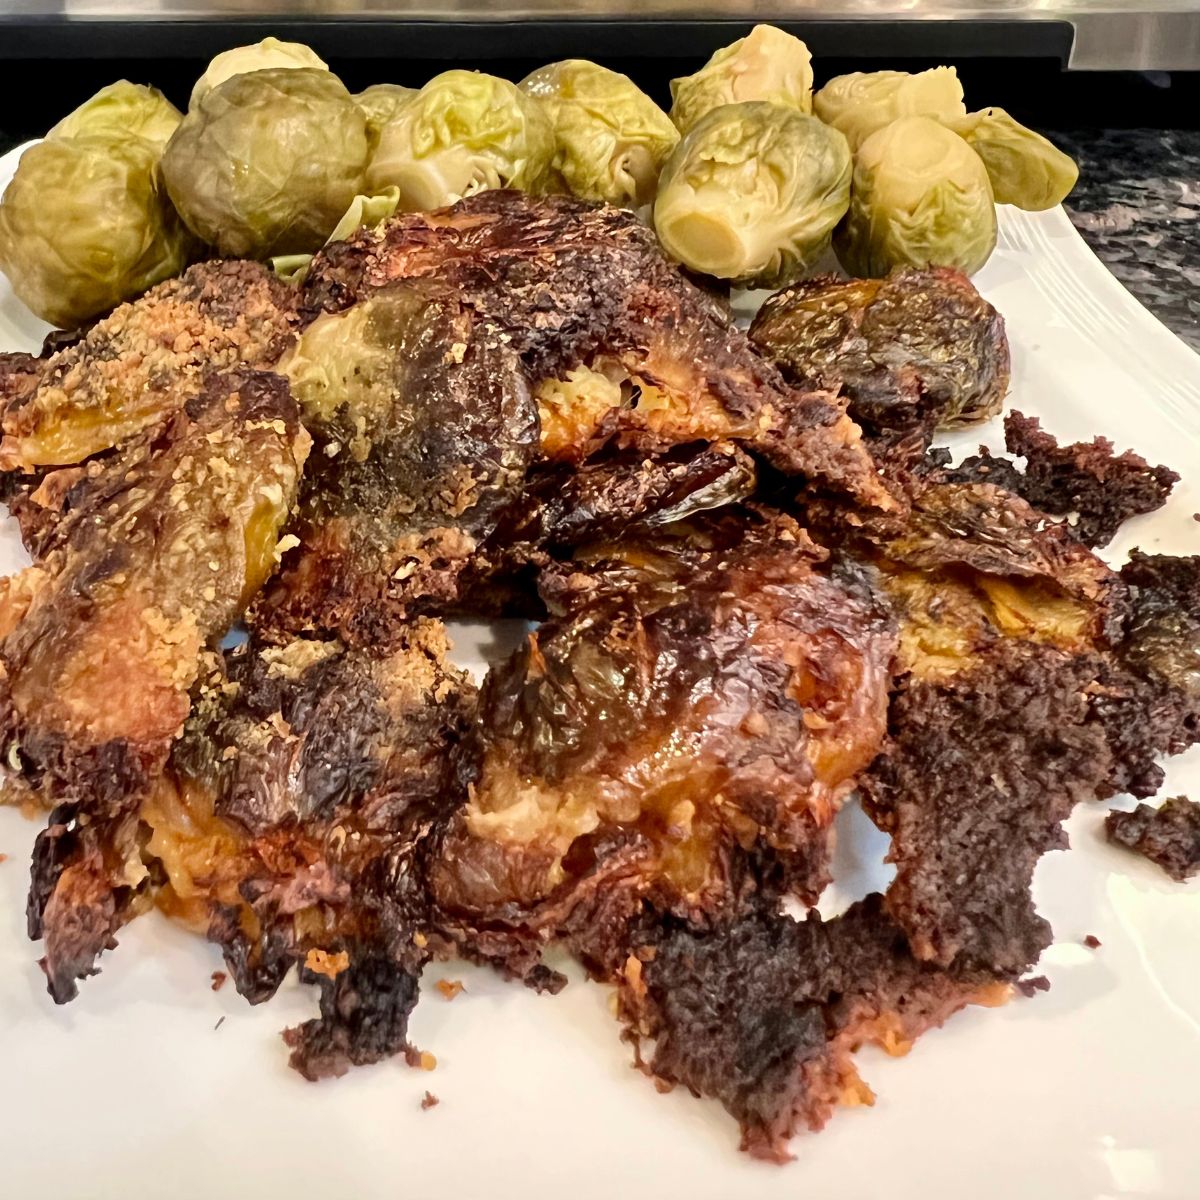 Crispy mashed brussel sprouts on a plate with steamed brussel sprouts